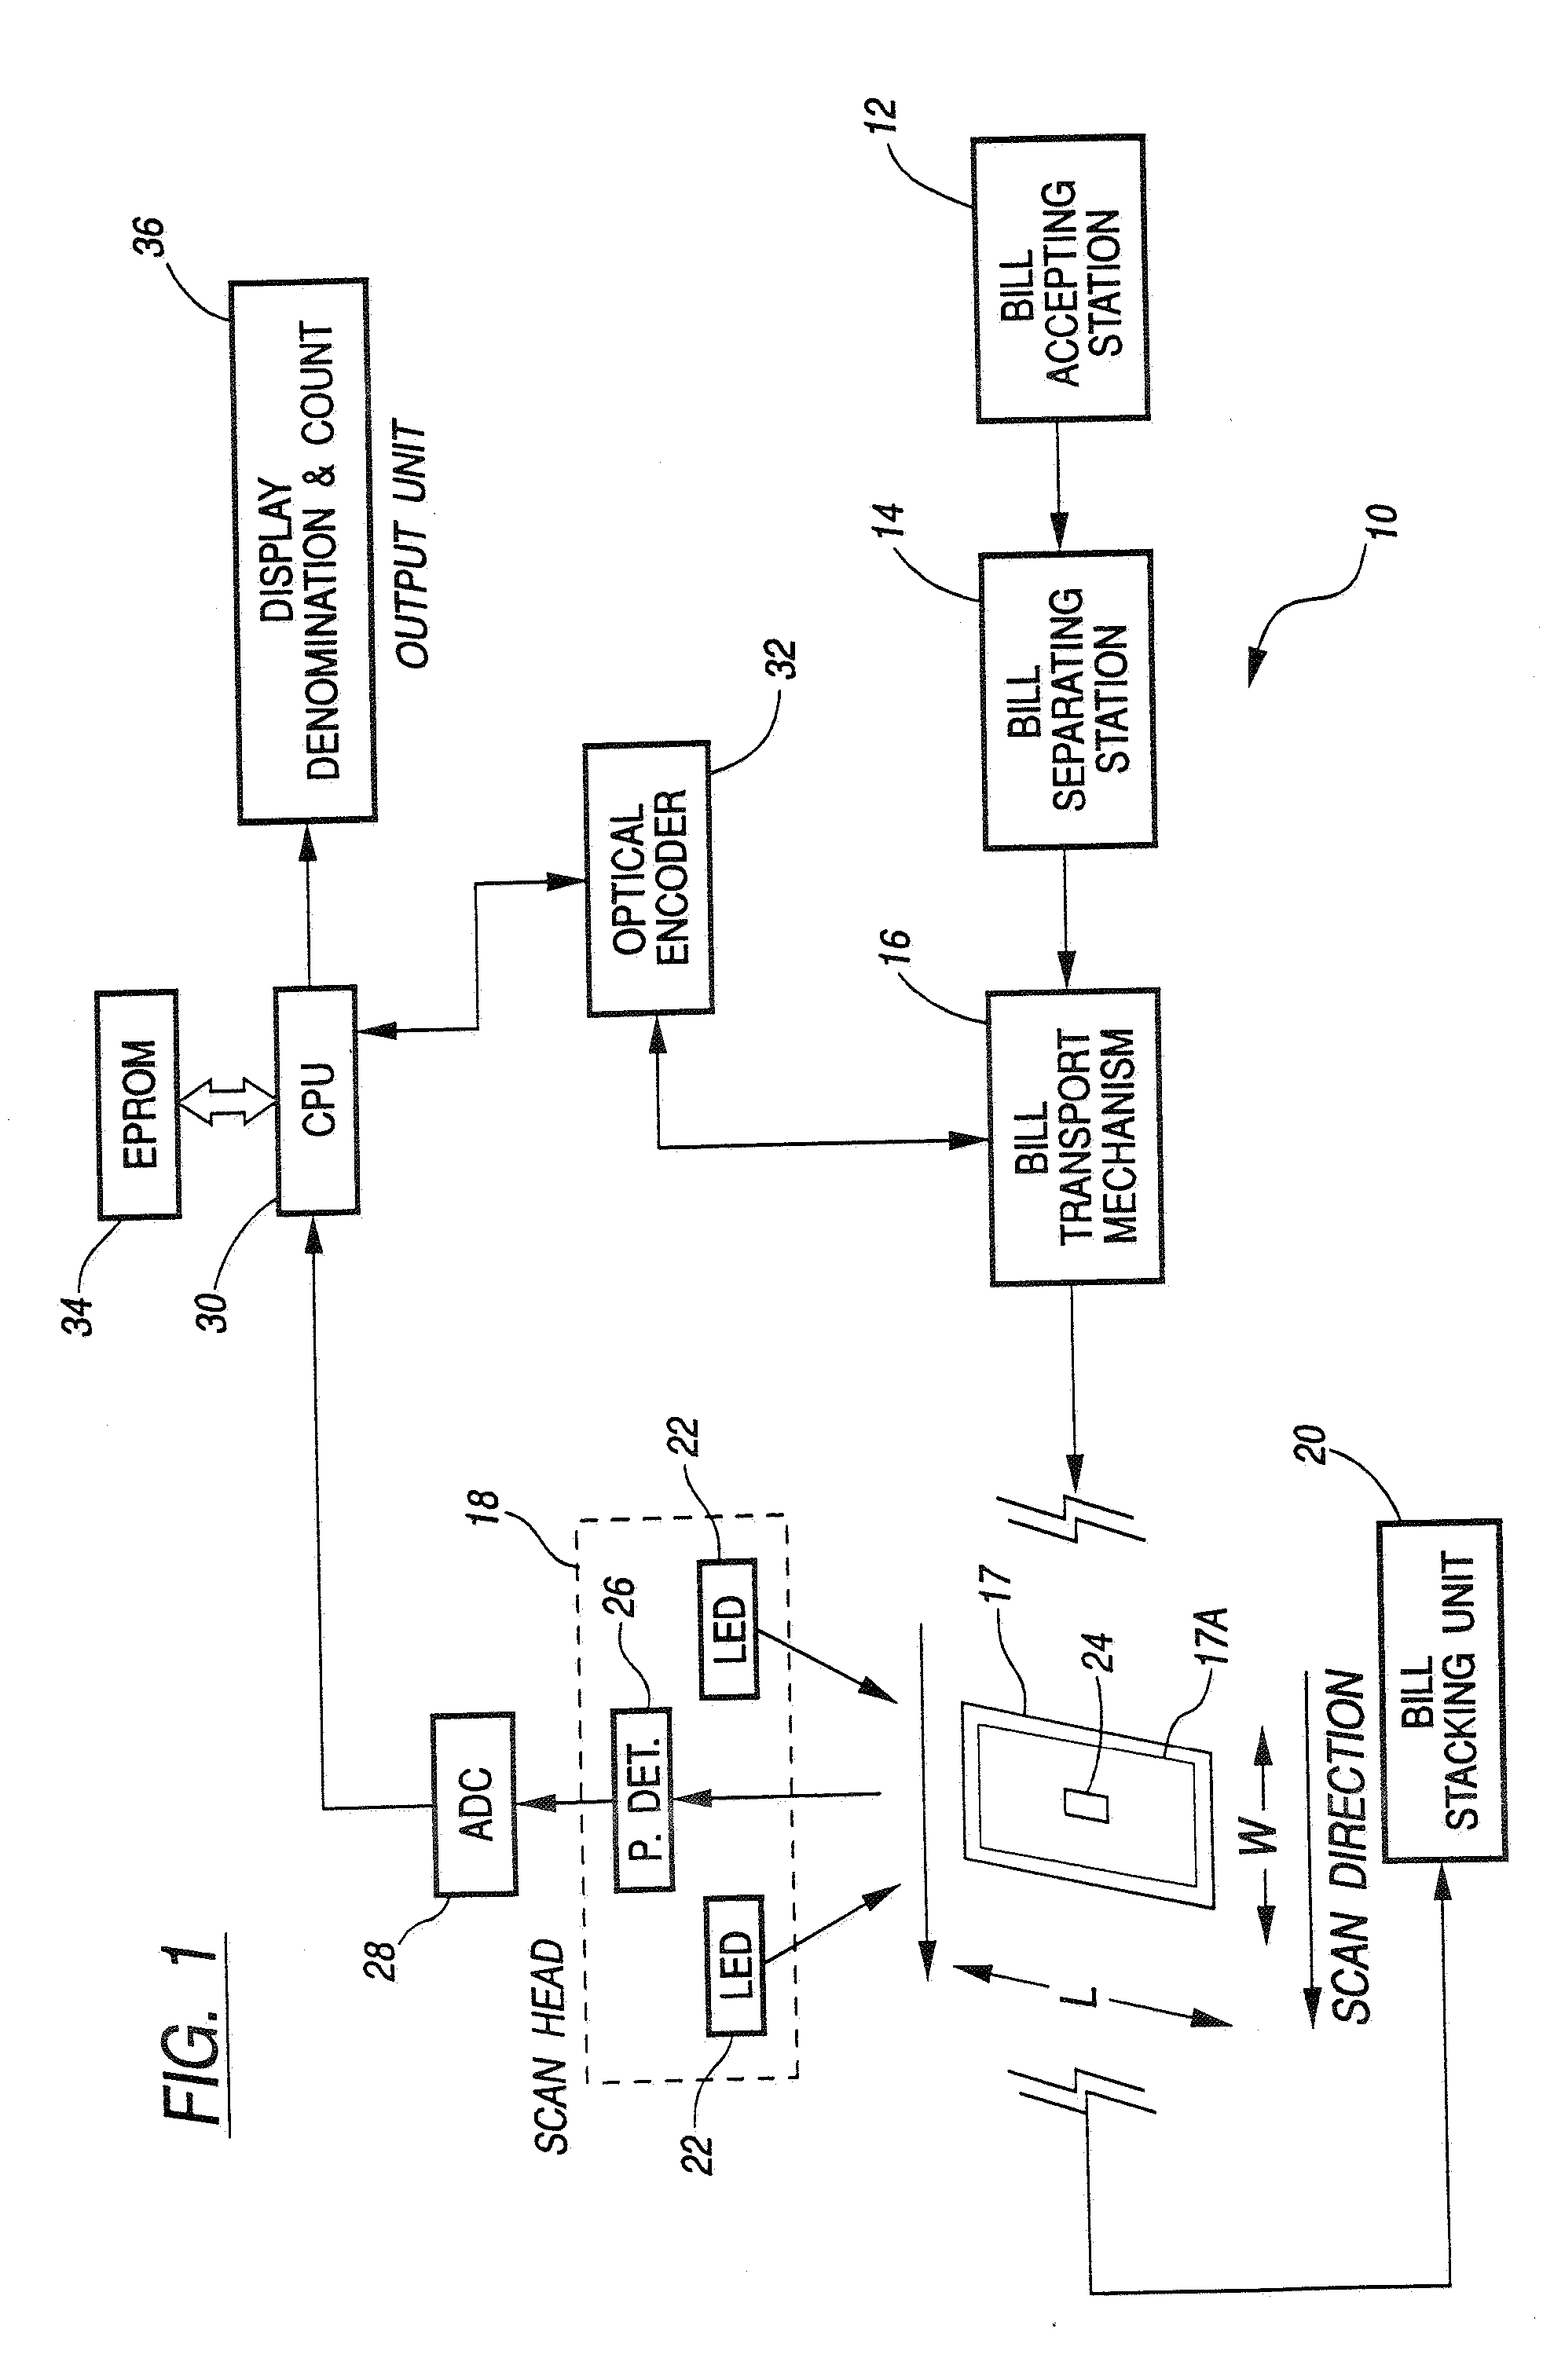 Method and apparatus for currency discrimination